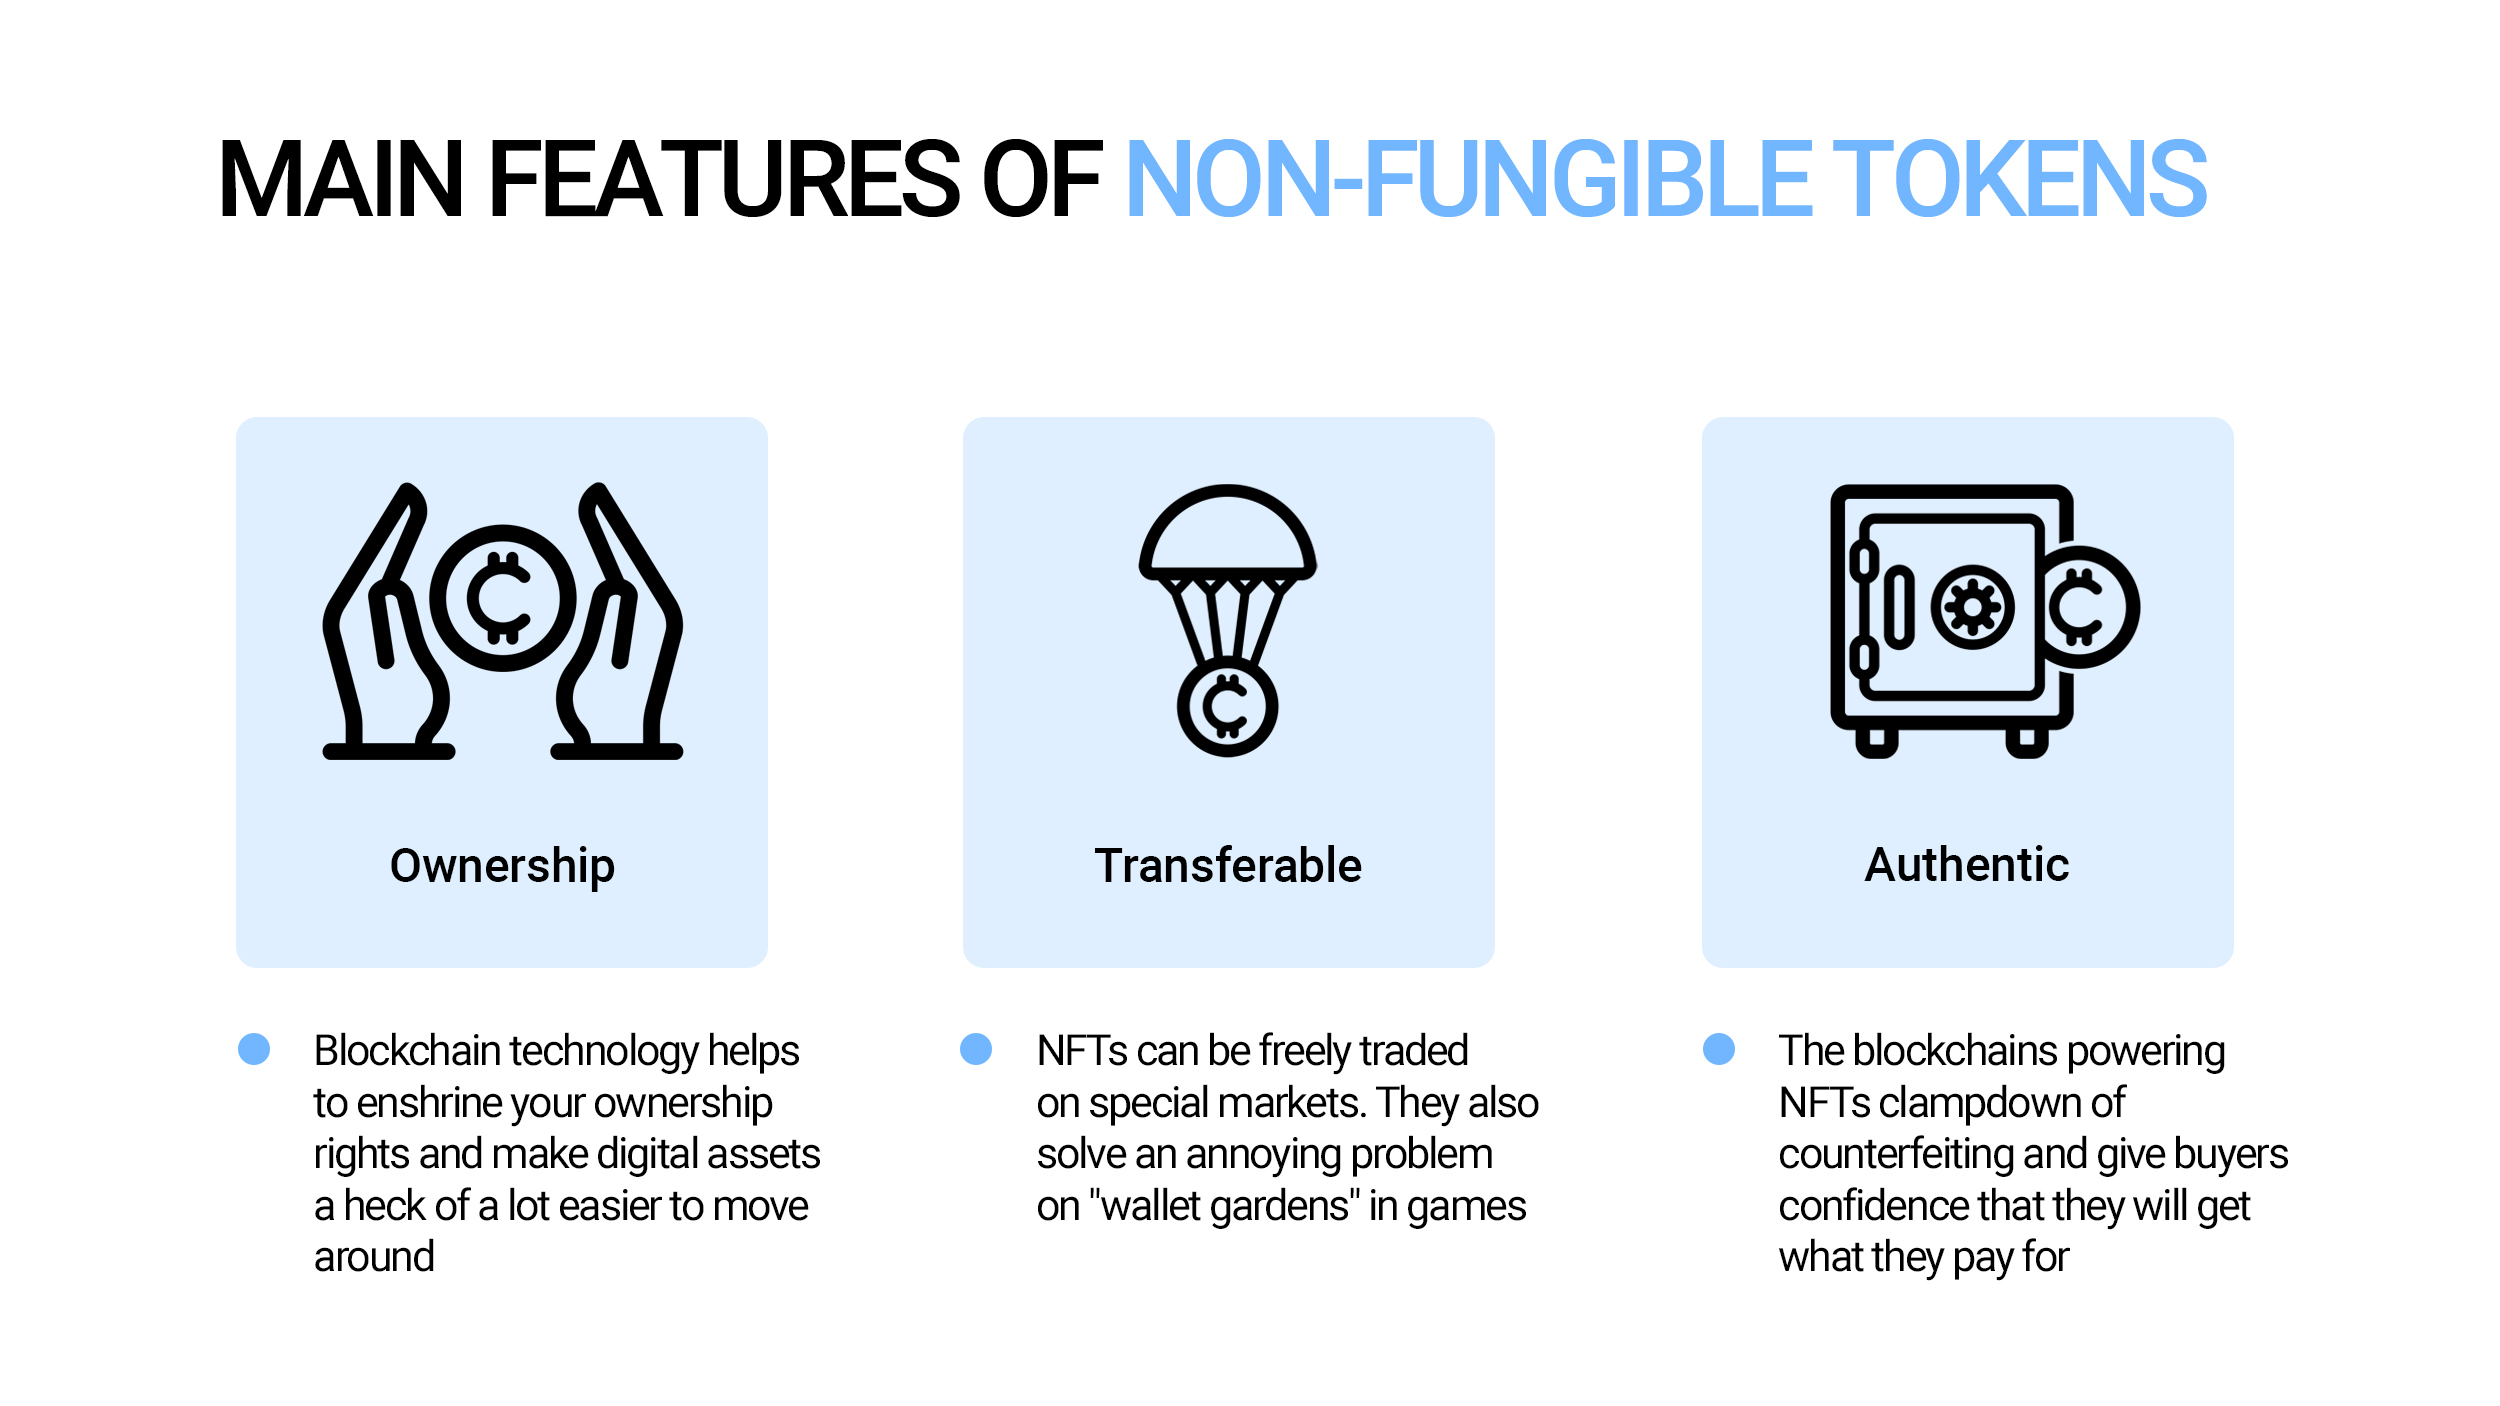 Main features of non-fungible tokens